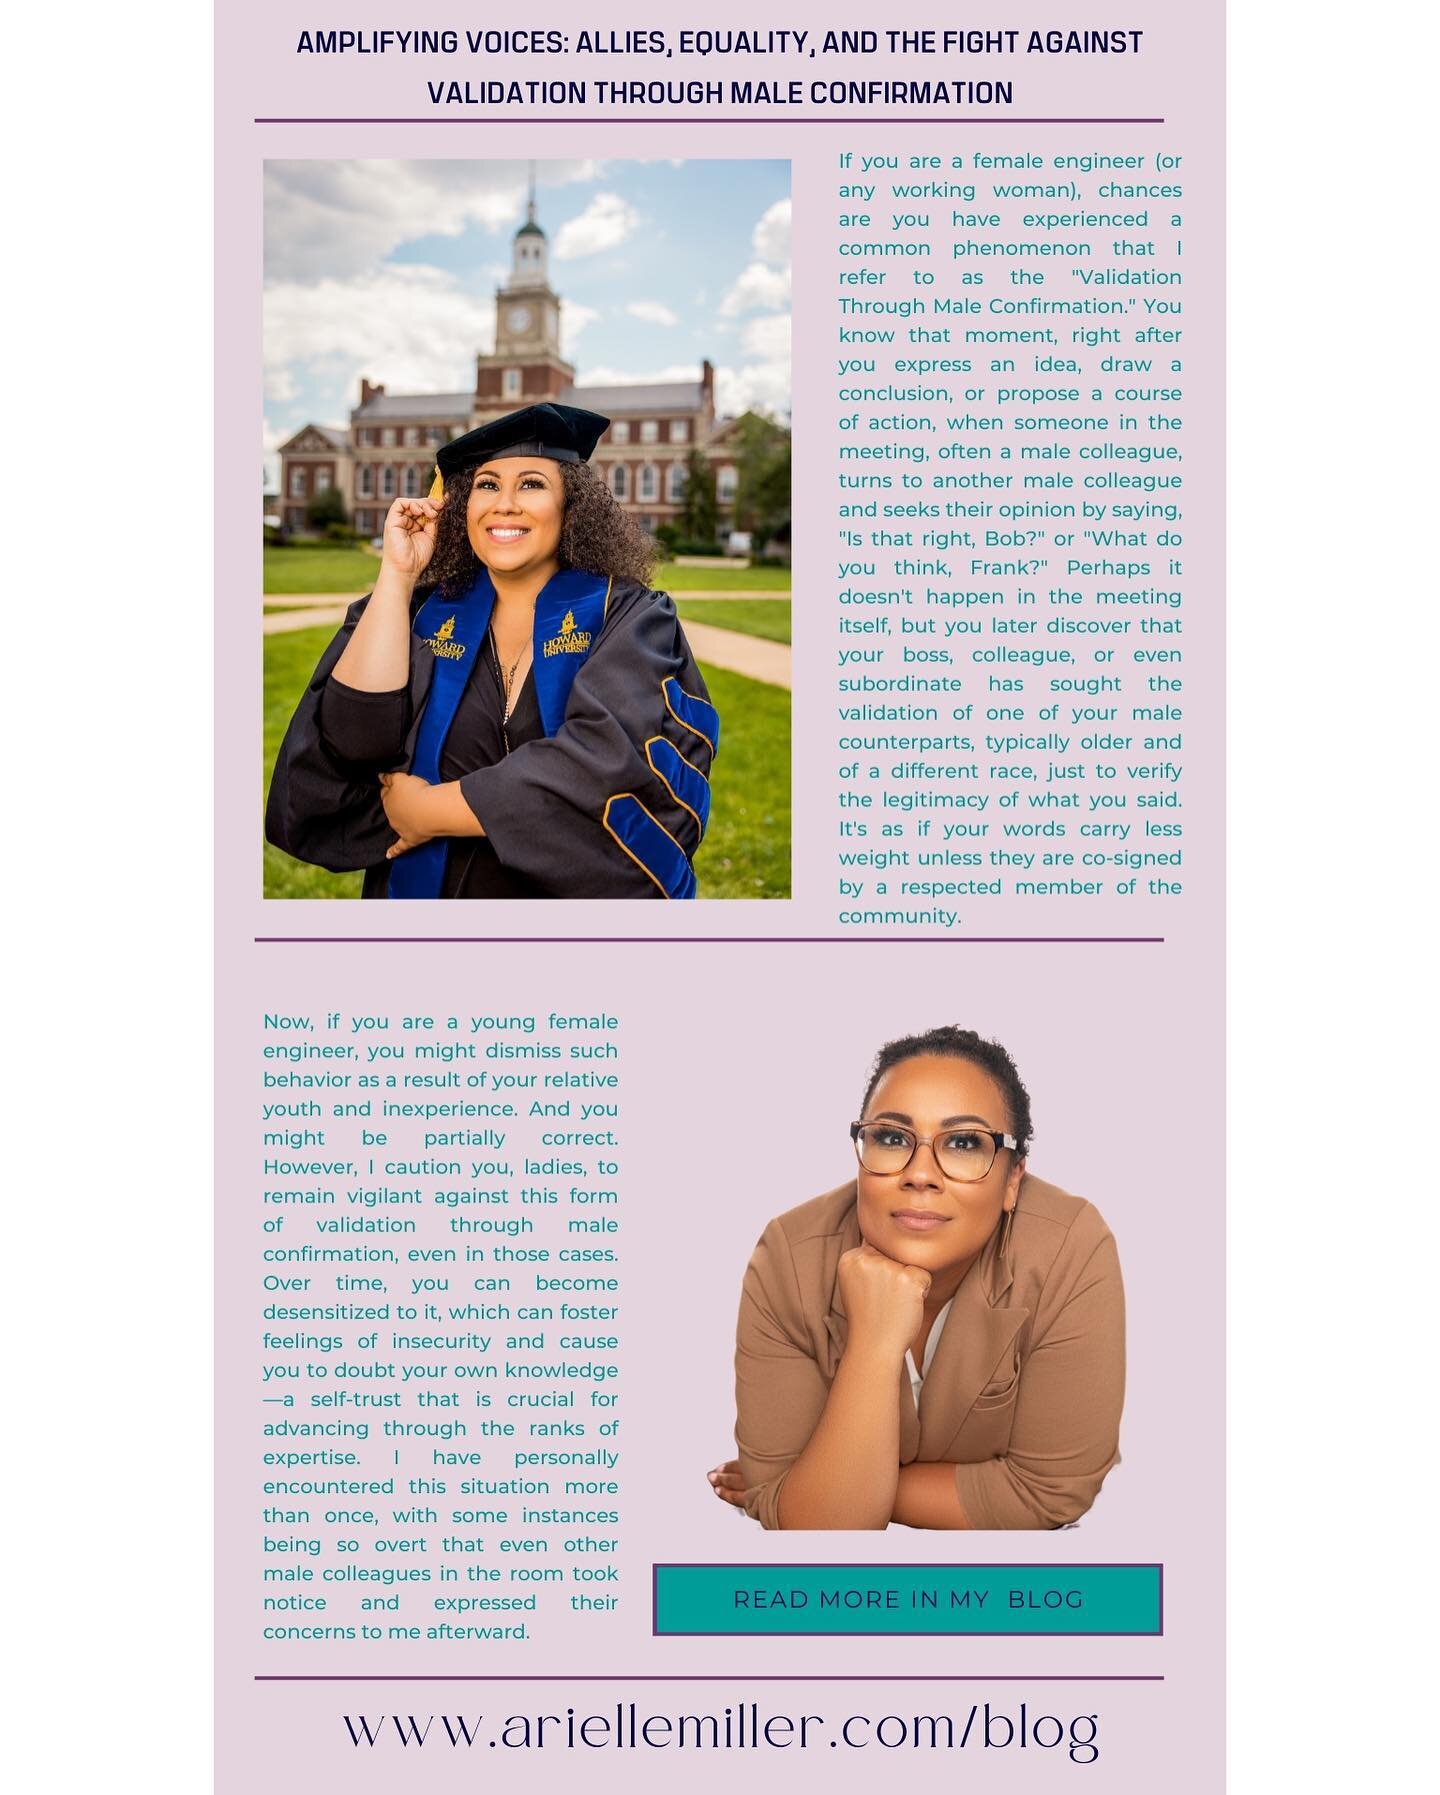 Check out my blog post on  Amplifying Voices: Allies, Equality, and the Fight against Validation through Male Confirmation

Head over to my website to read more 

#blackwomeninstem 
#blog
#phdlife🎓 
#DRARIELLE